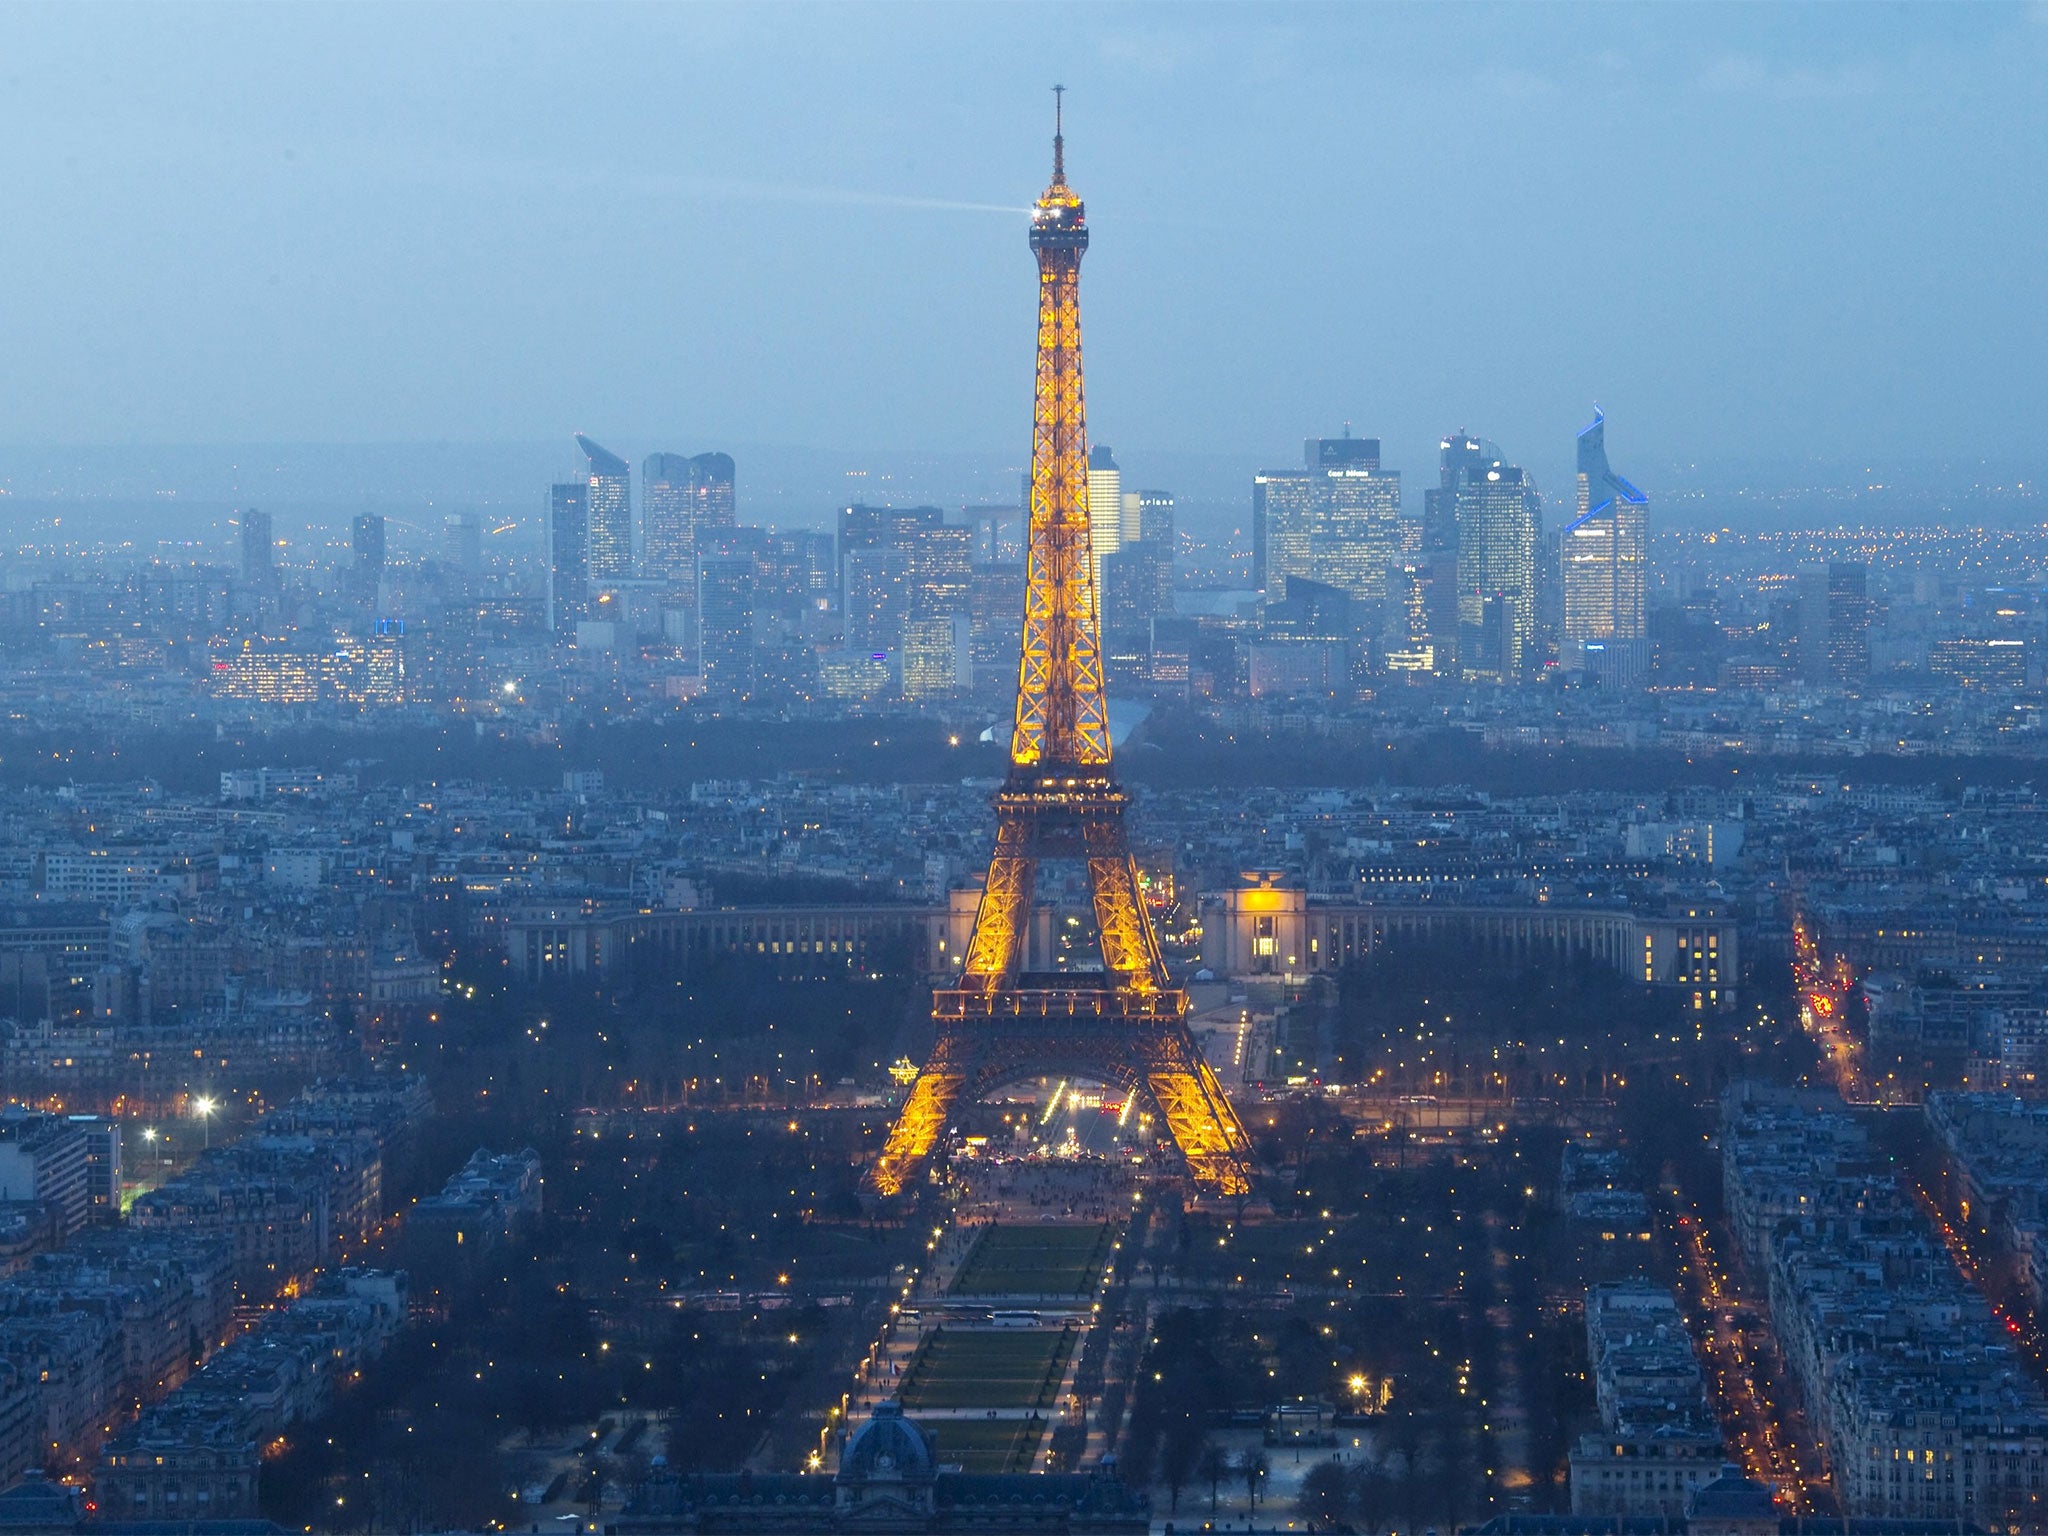 Paris will remain one of the world's most popular destinations